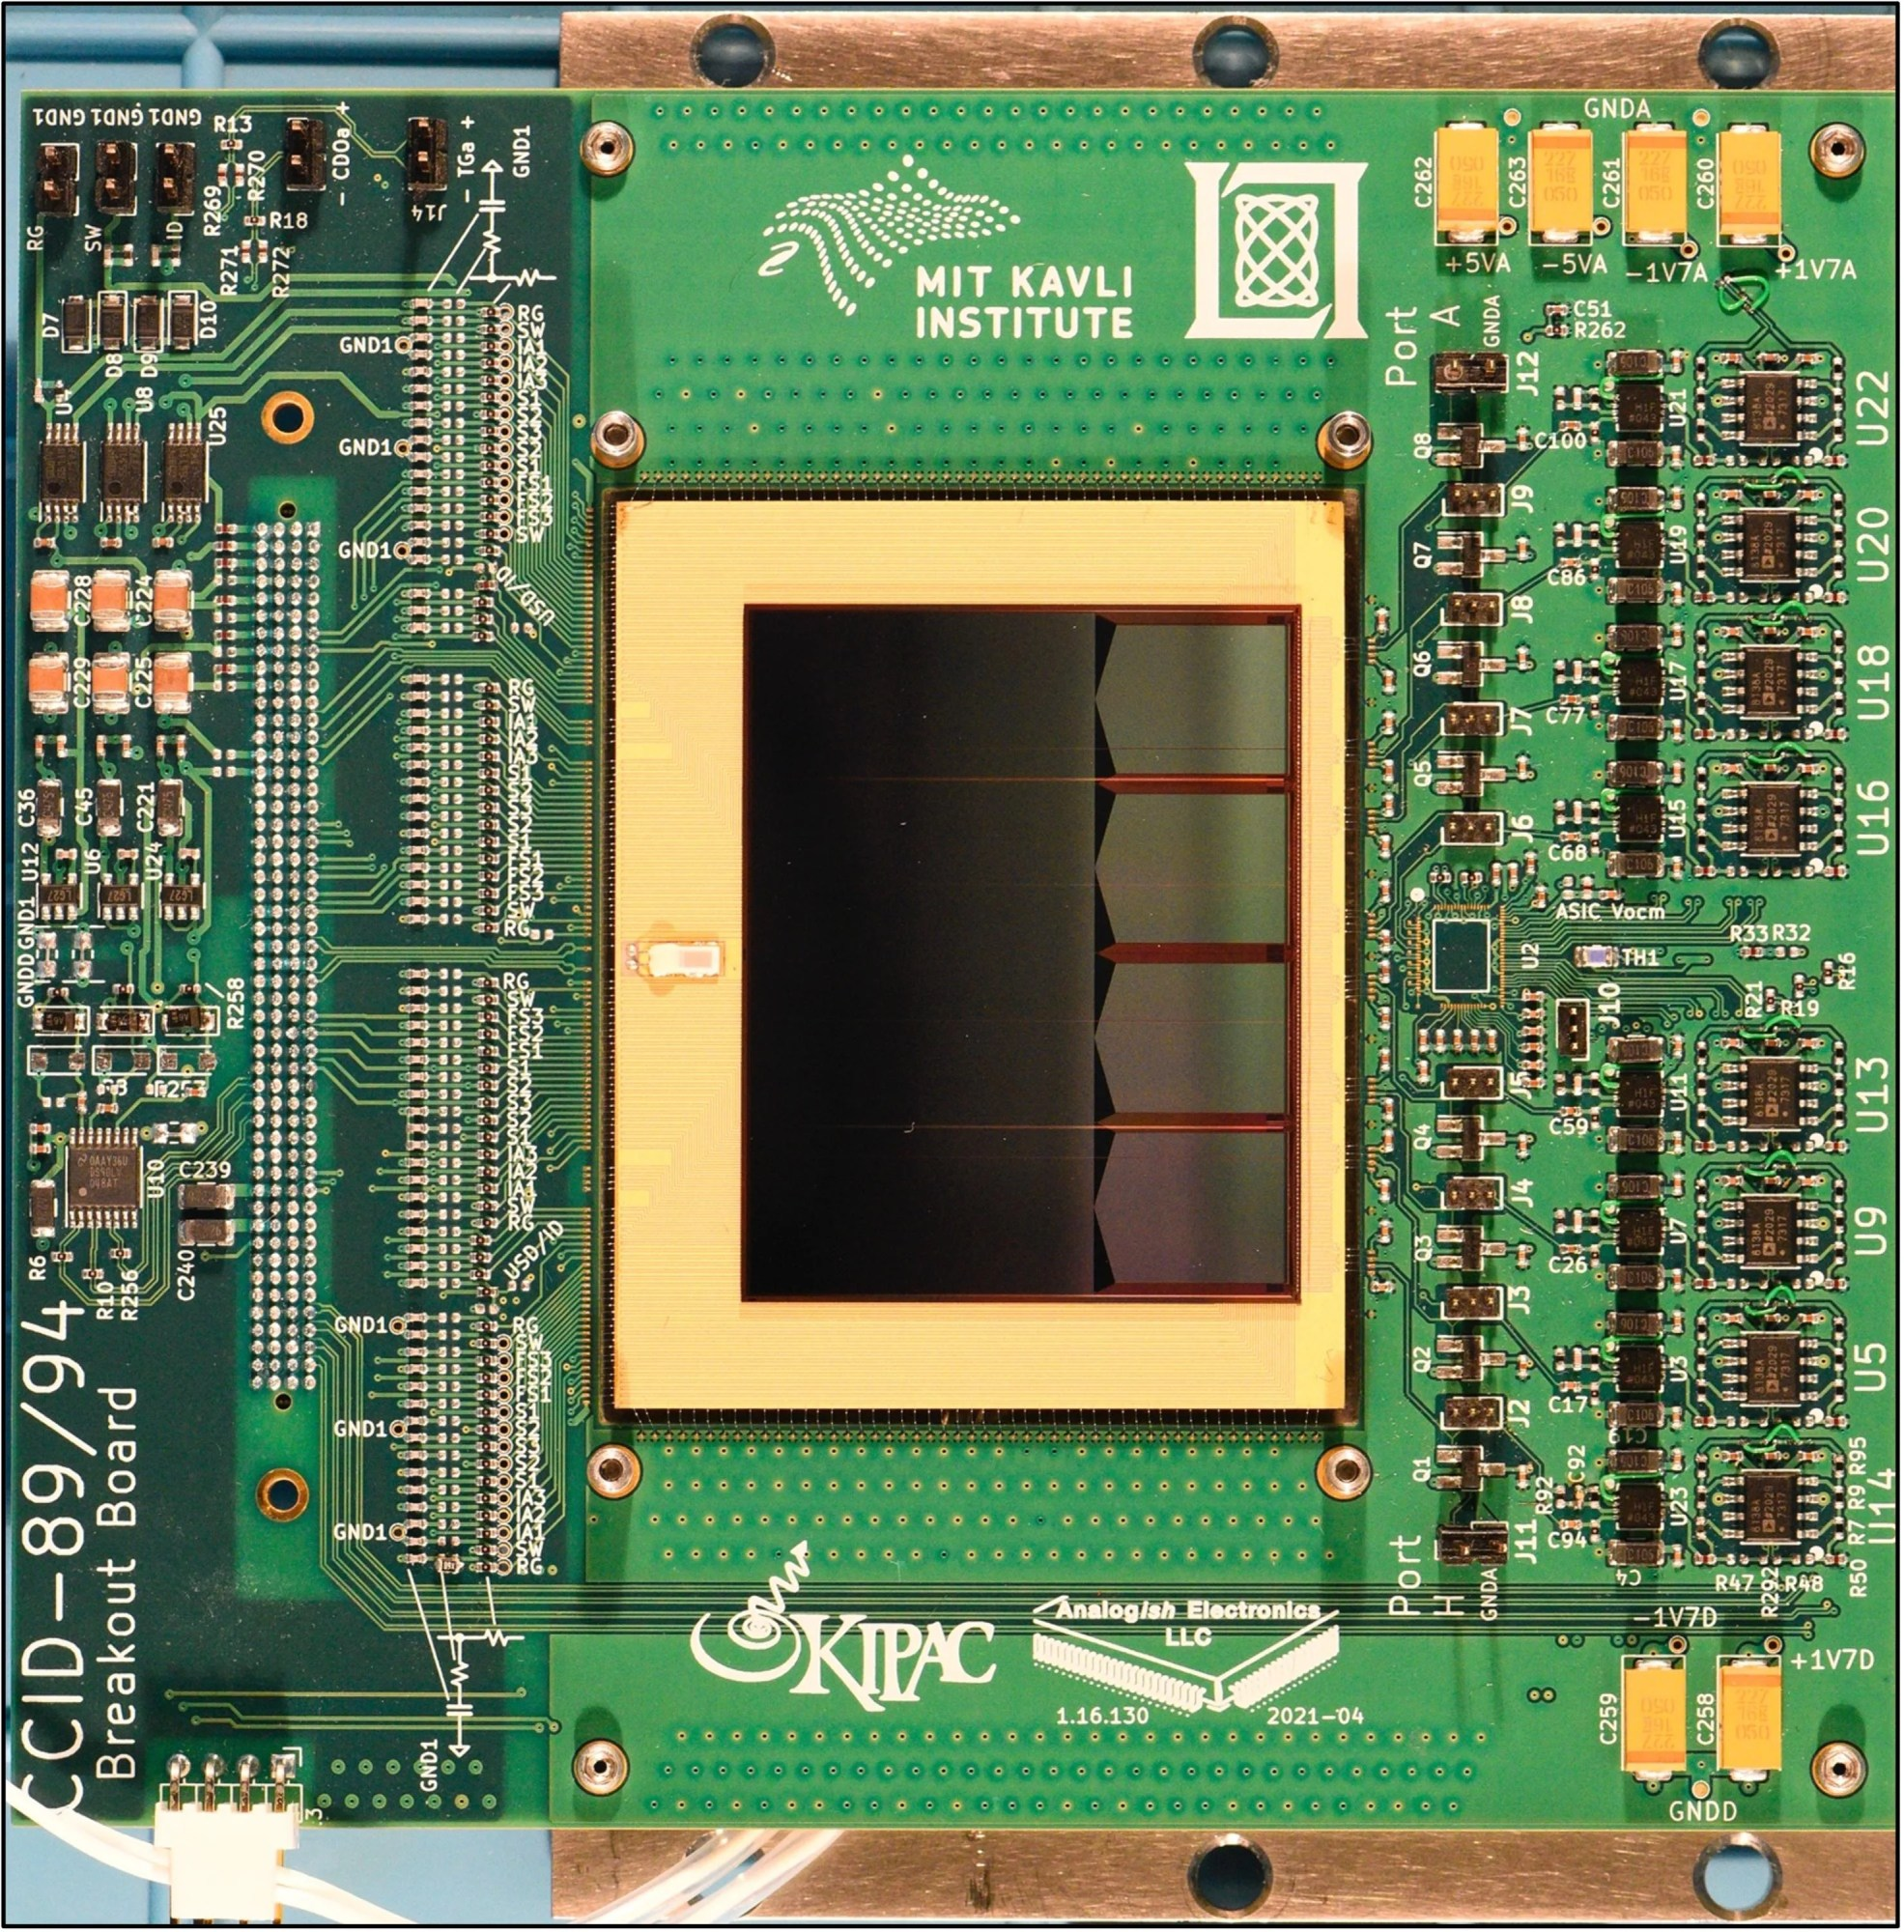 Close up photo of a green and gold image sensor with numbers and text on it.